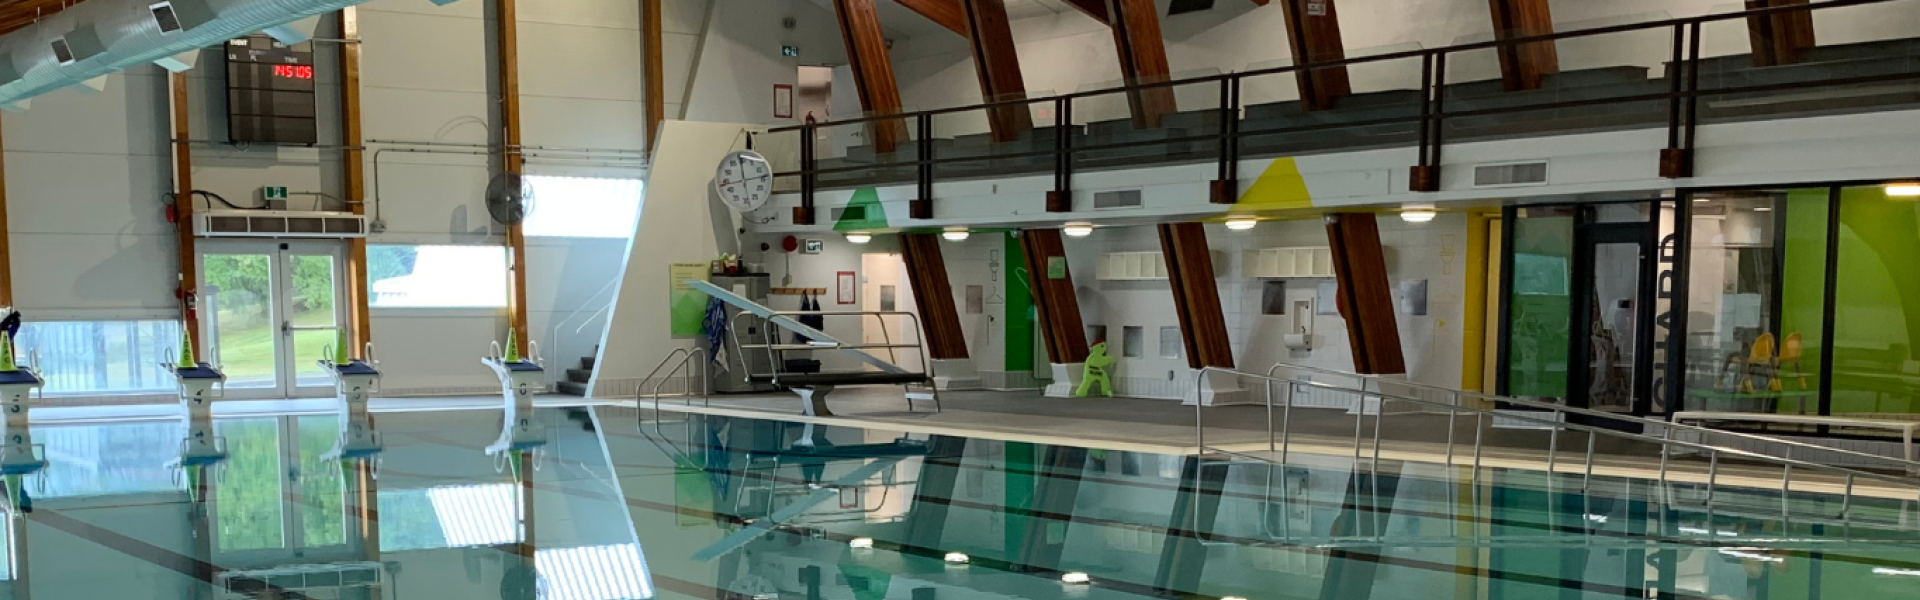 A photo of the main pool at the Terrace & District Aquatic Centre